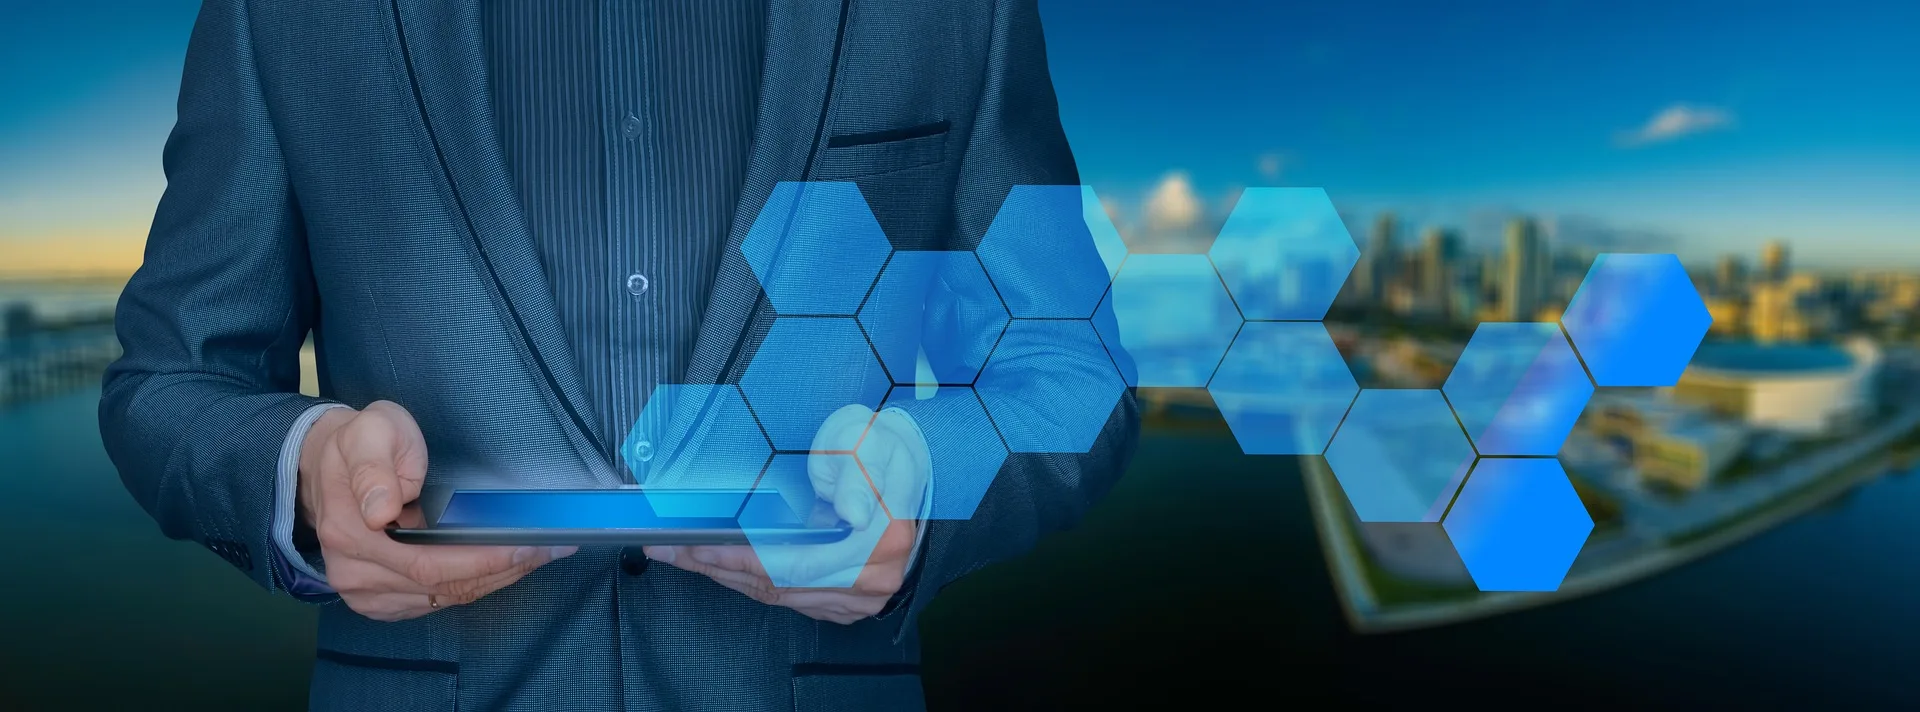 Asset Equalizers banner:
A person in a suit stands holding a tablet flat so we can see part of the screen. The screen is lit up blue and their are holographic blue hexagons across the image as if coming from the screen and to the side. The background is a city scape along a waterfront.